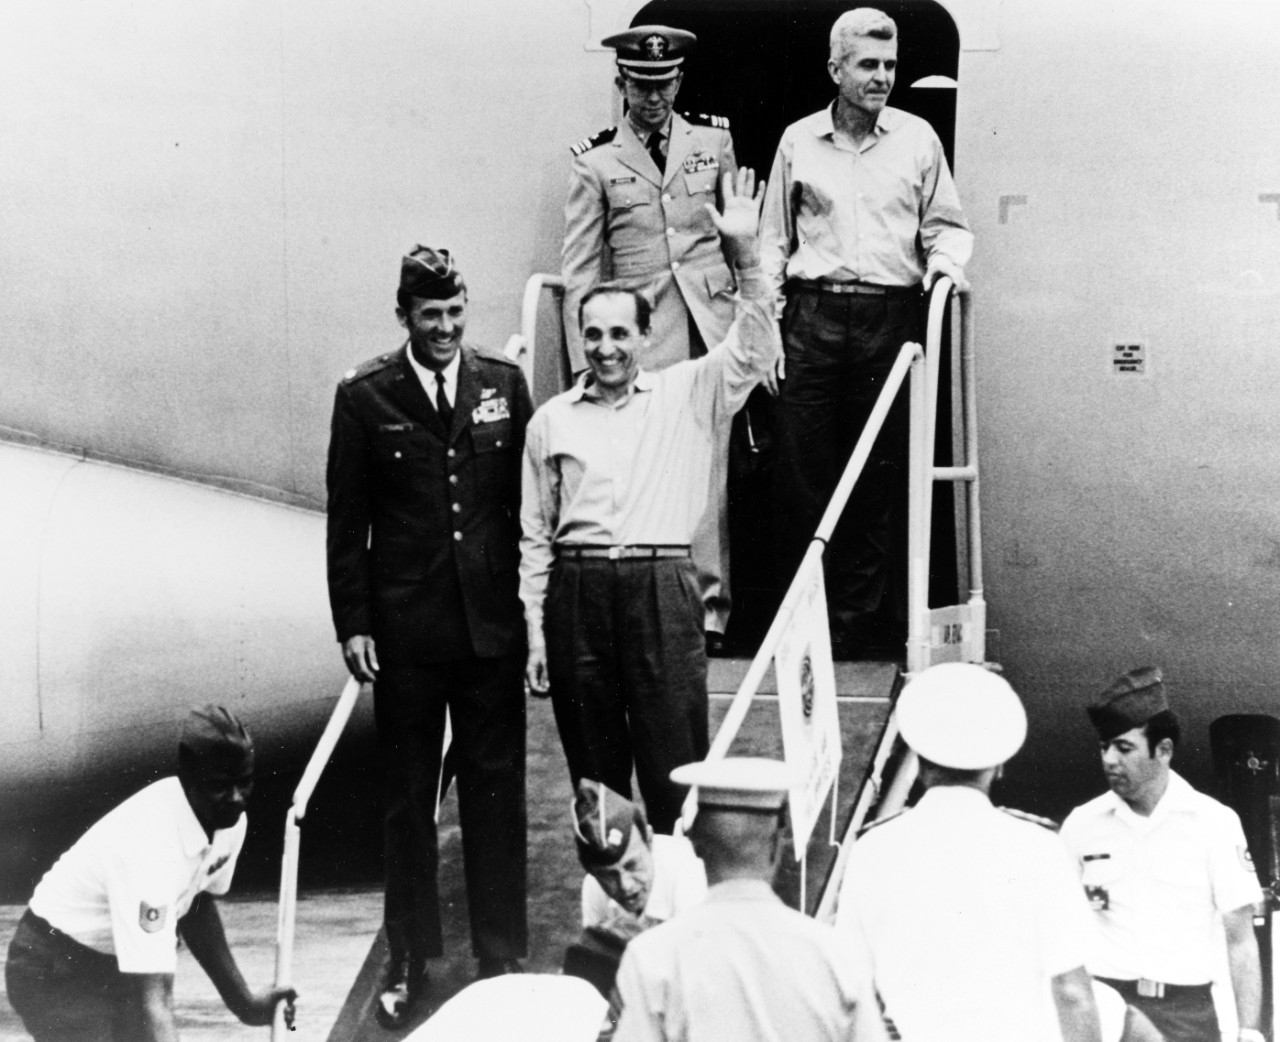 Two of the returned prisoners of war step from the second U.S. Air Force C-141 to leave Hanoi, at Clark Air Force Base, Philippine Islands, in February 1973. They are: Colonel Robinson Risner, USAF (waving), and Captain James Stockdale, USN. Thei...